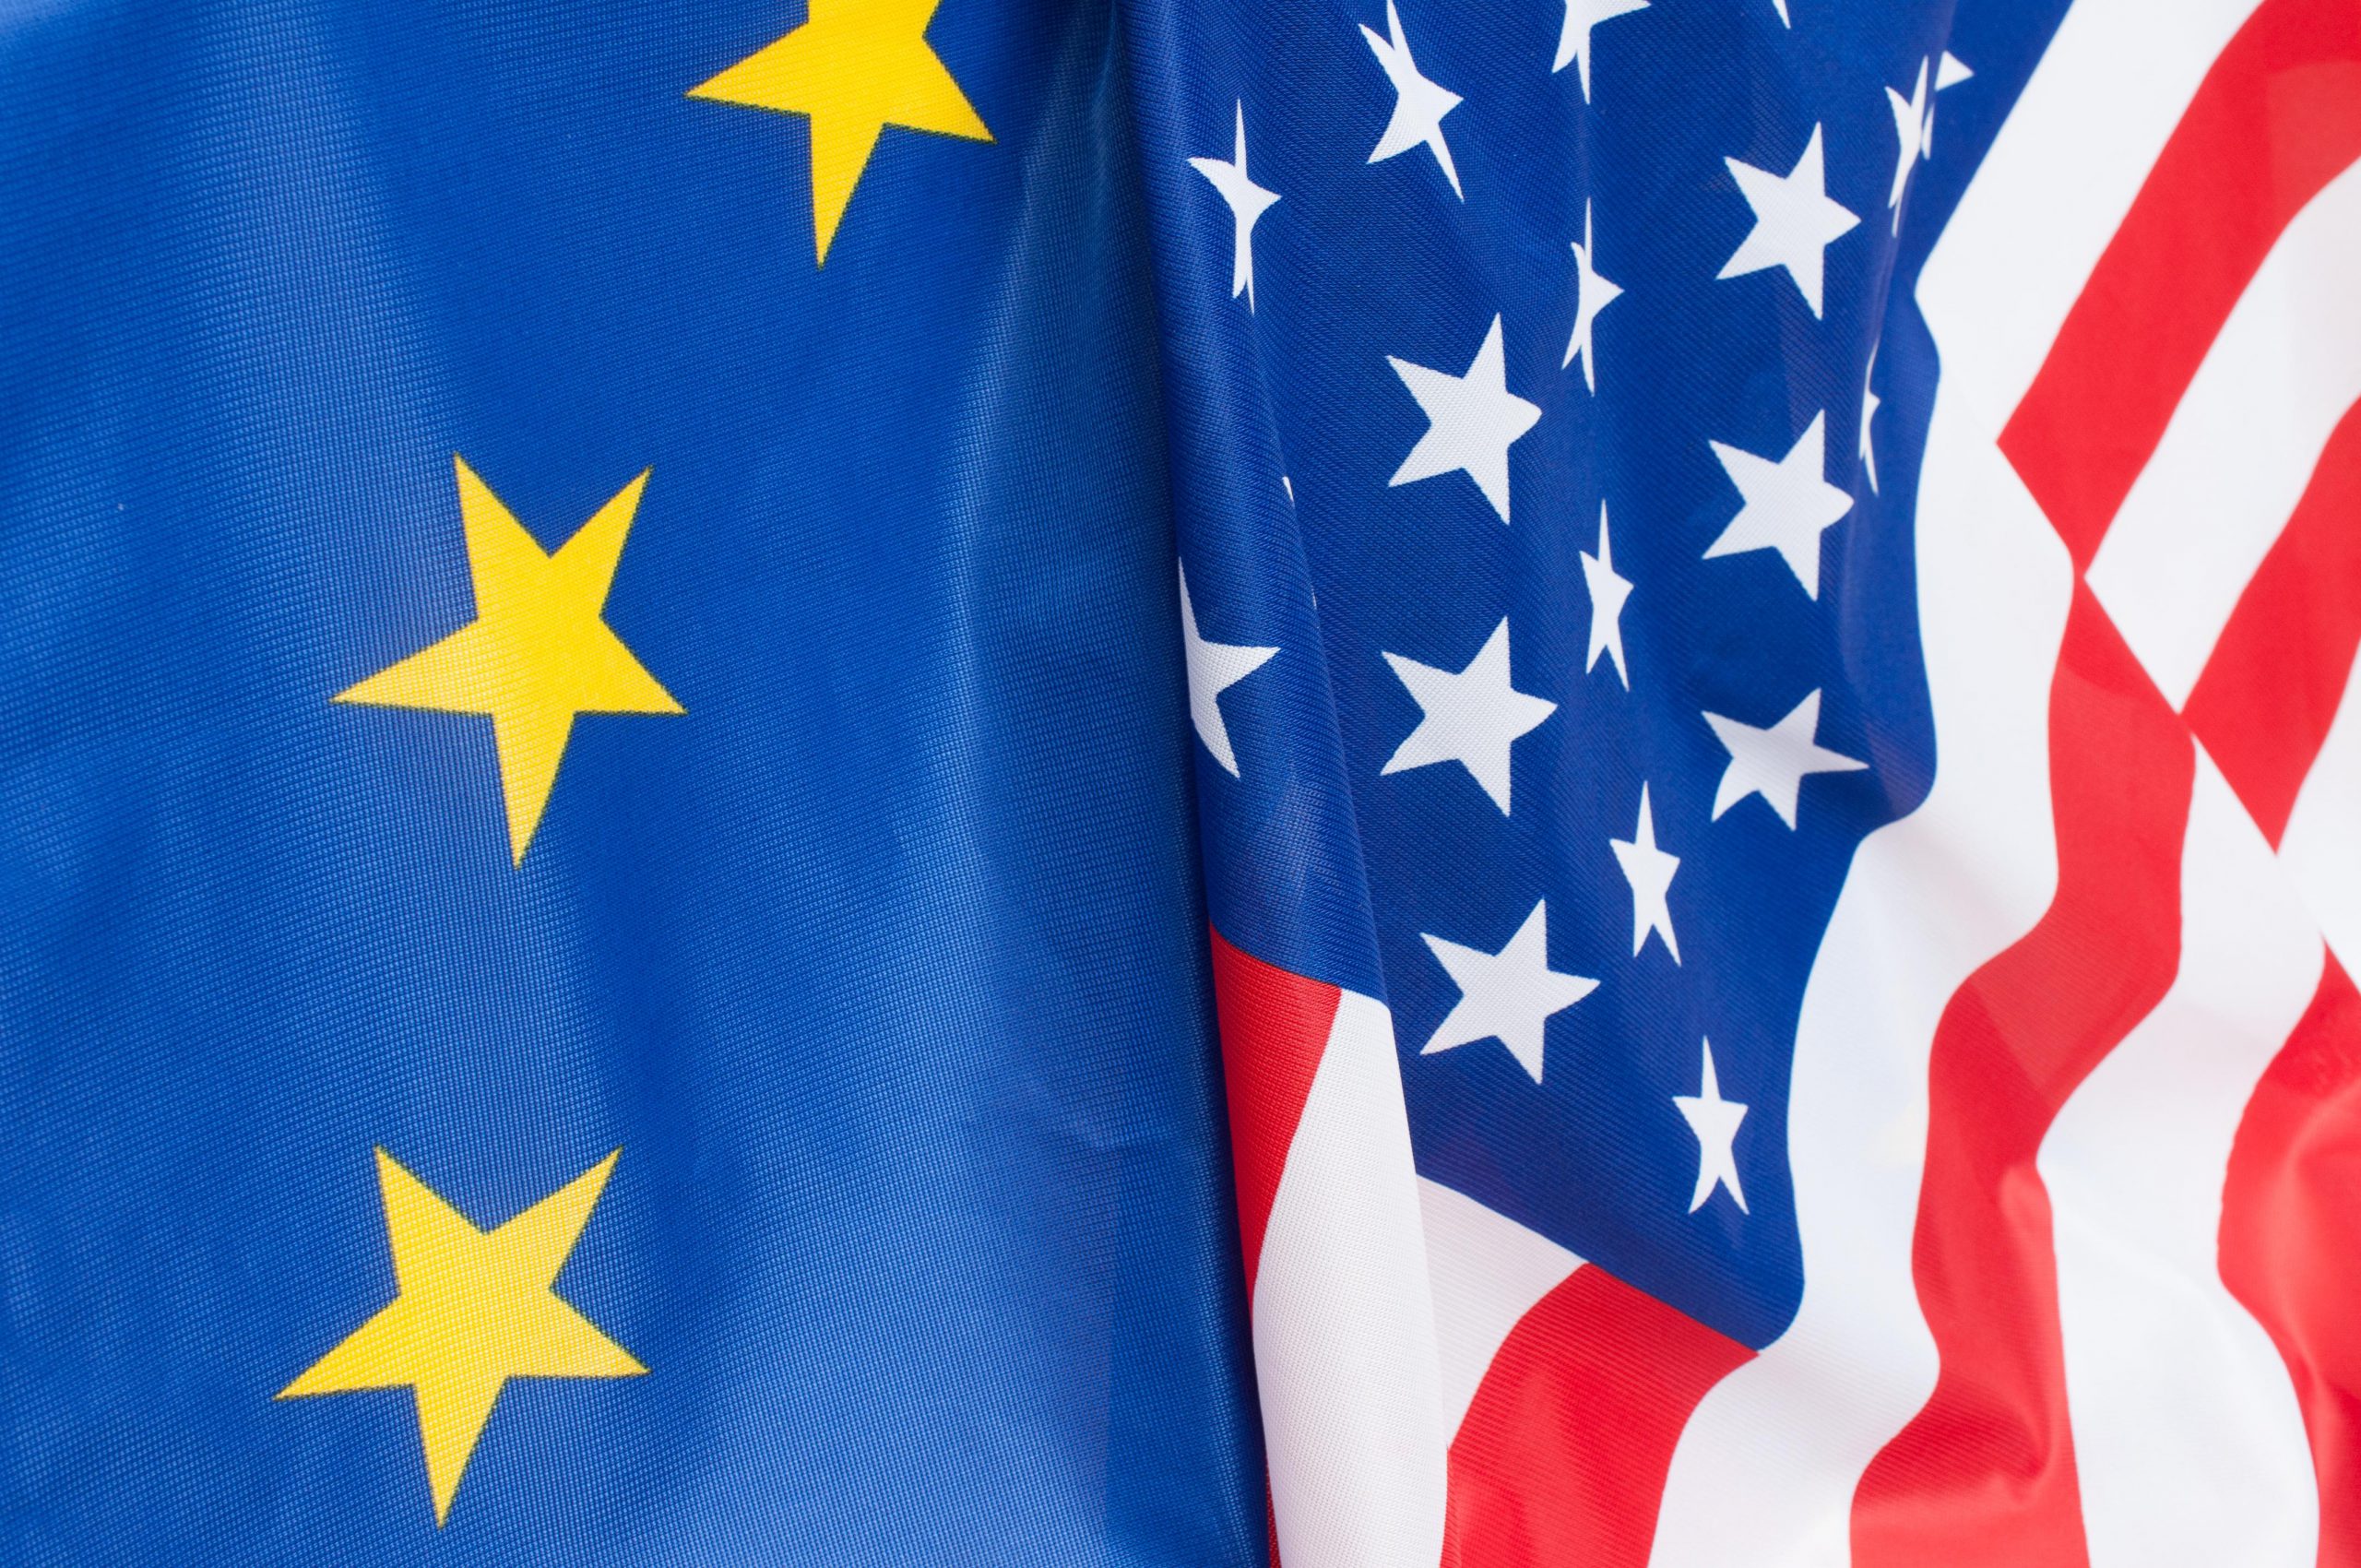 The E.U. and U.S. coordinate action on Belarus